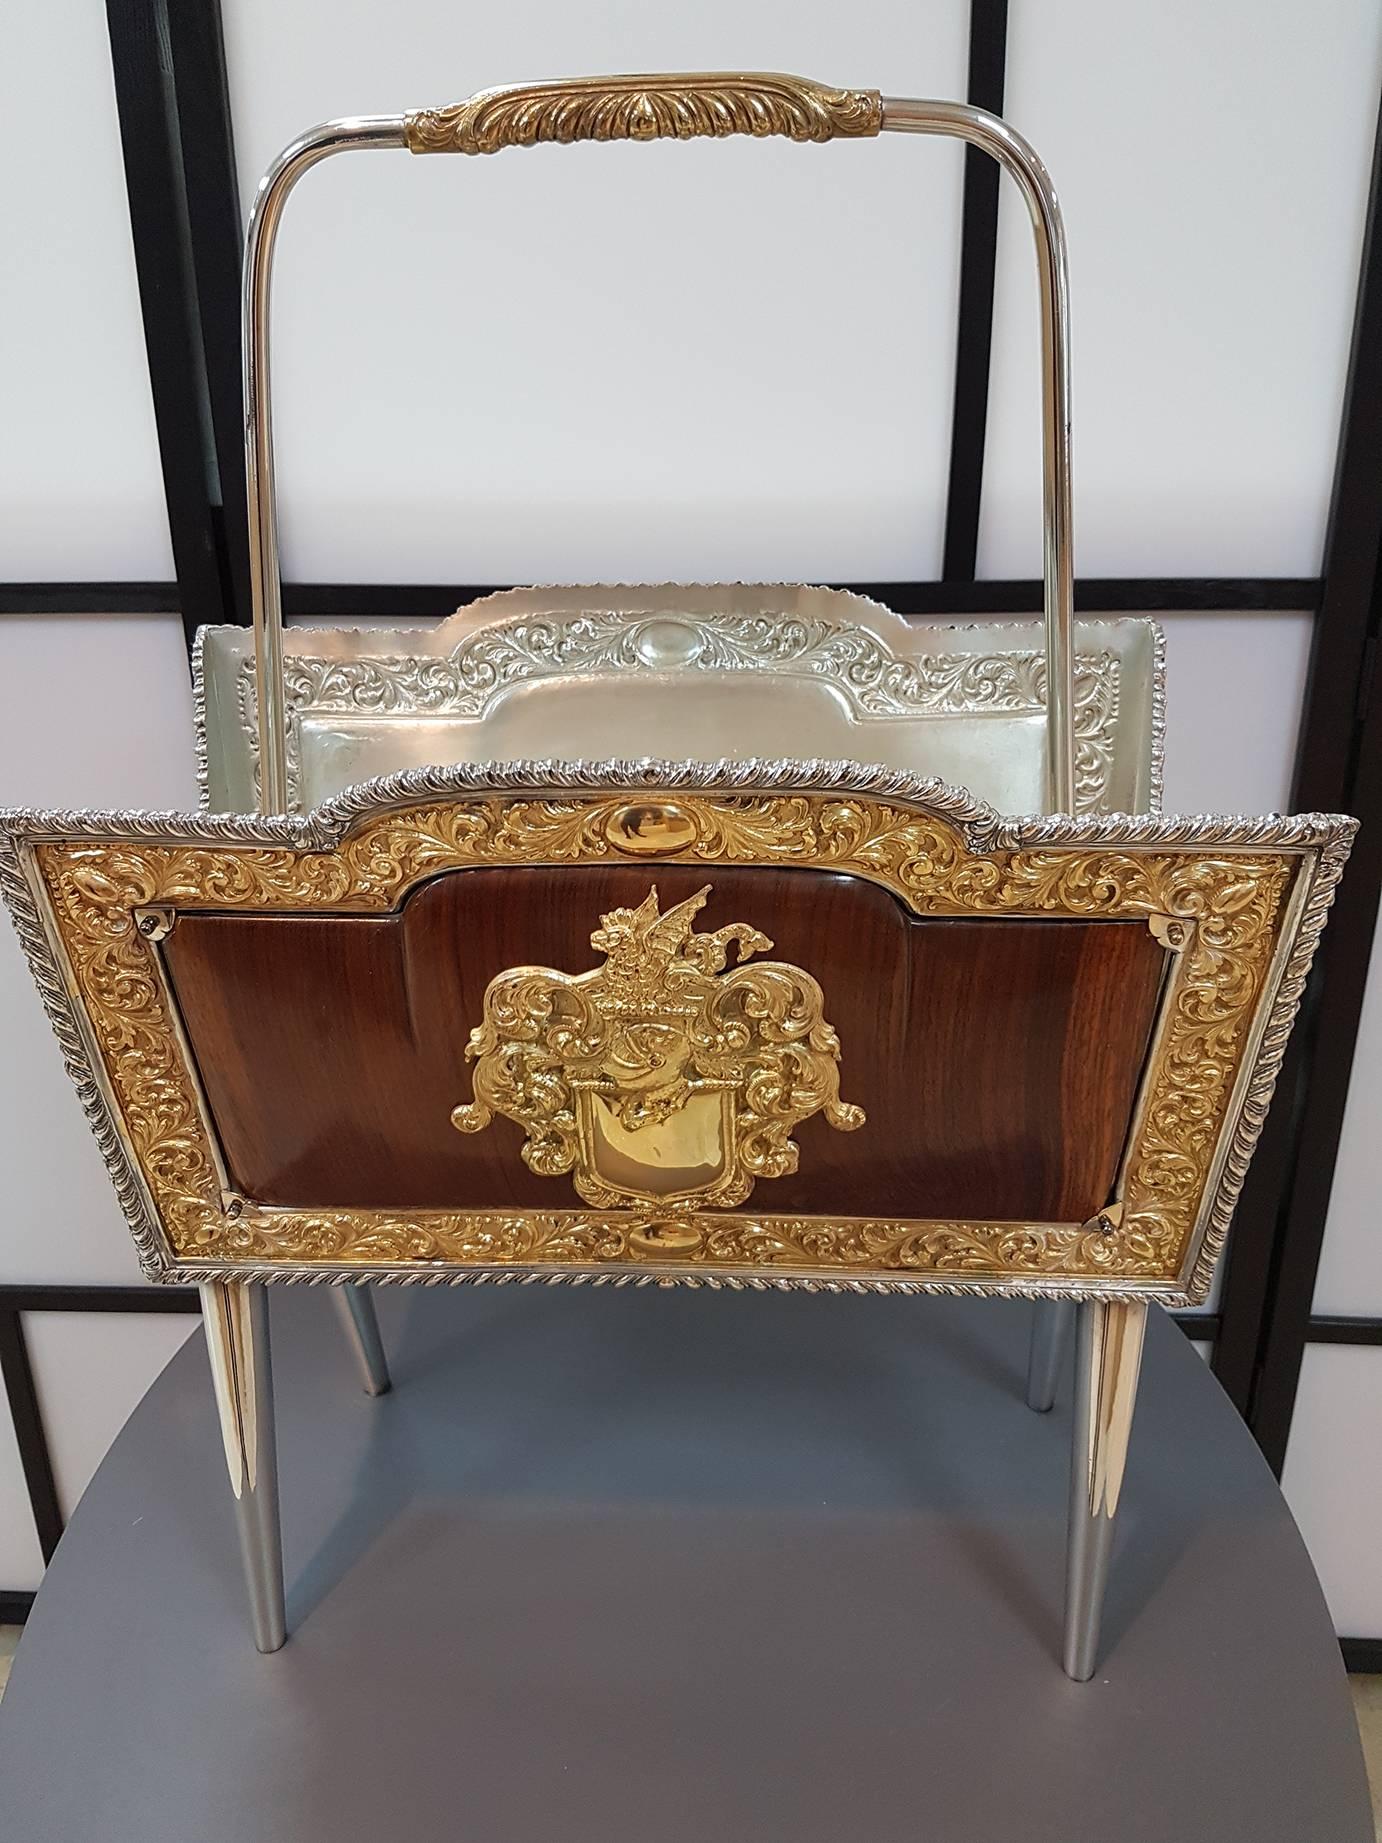 This Queen Anne style mafazine rack-frame is composed of embossed, chiseled and gold-plated silver. It has additional valuable wooden panels, at the centre of which there are two silver escutcheons on which to engrave family crests, initials or